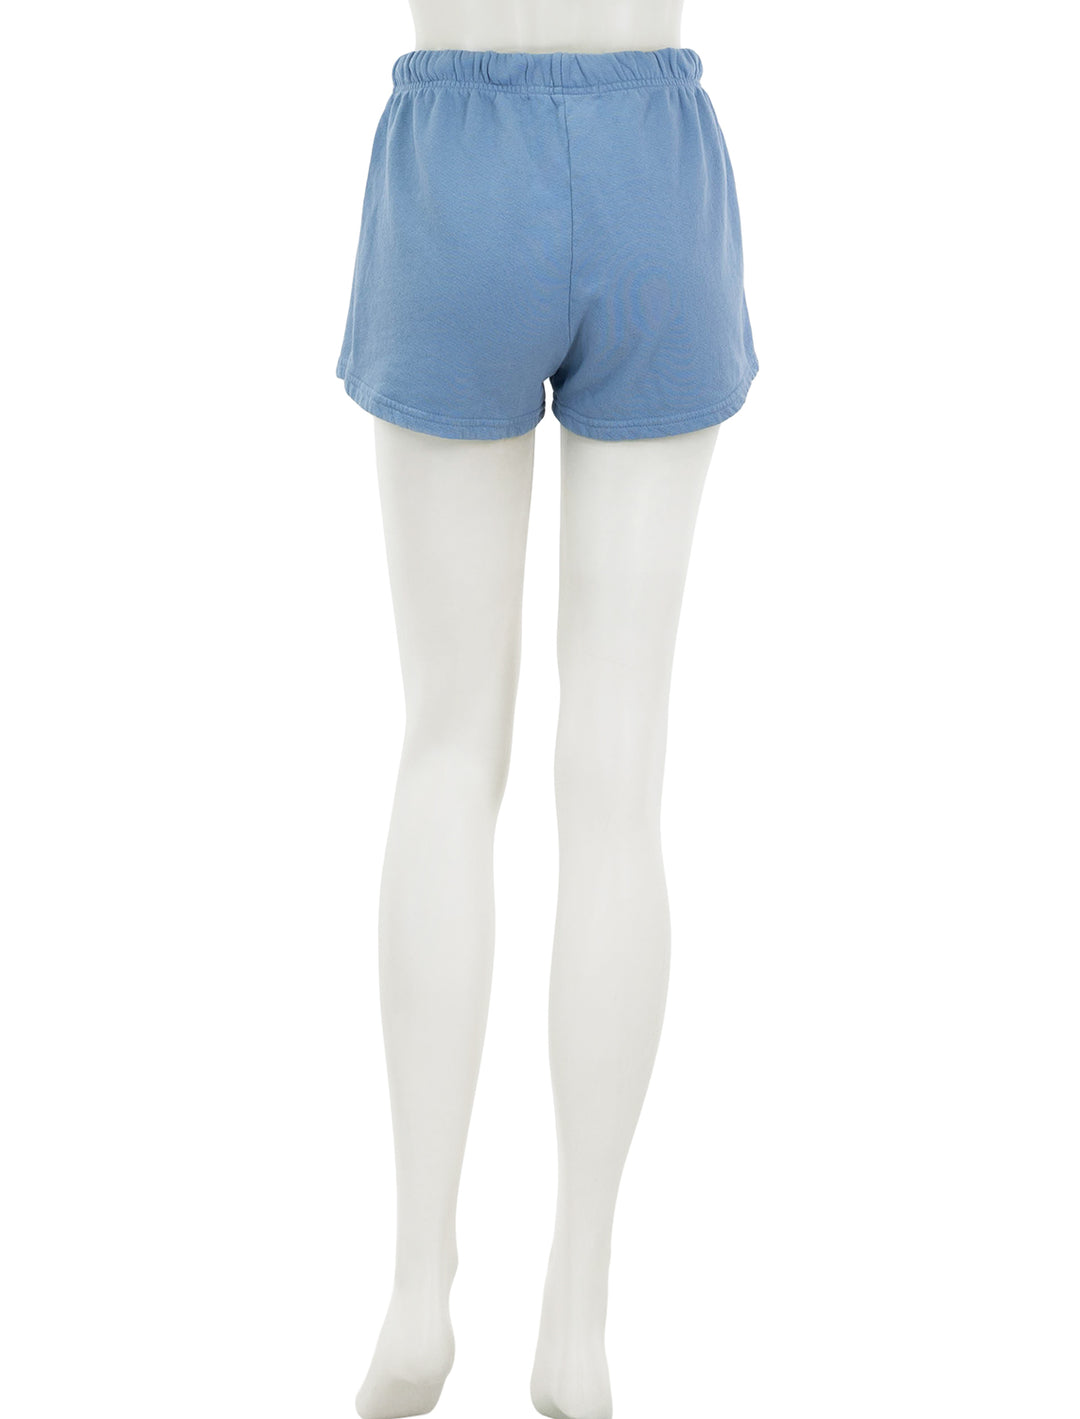 Back view of Perfectwhitetee's layla sweat shorts in carolina blue.